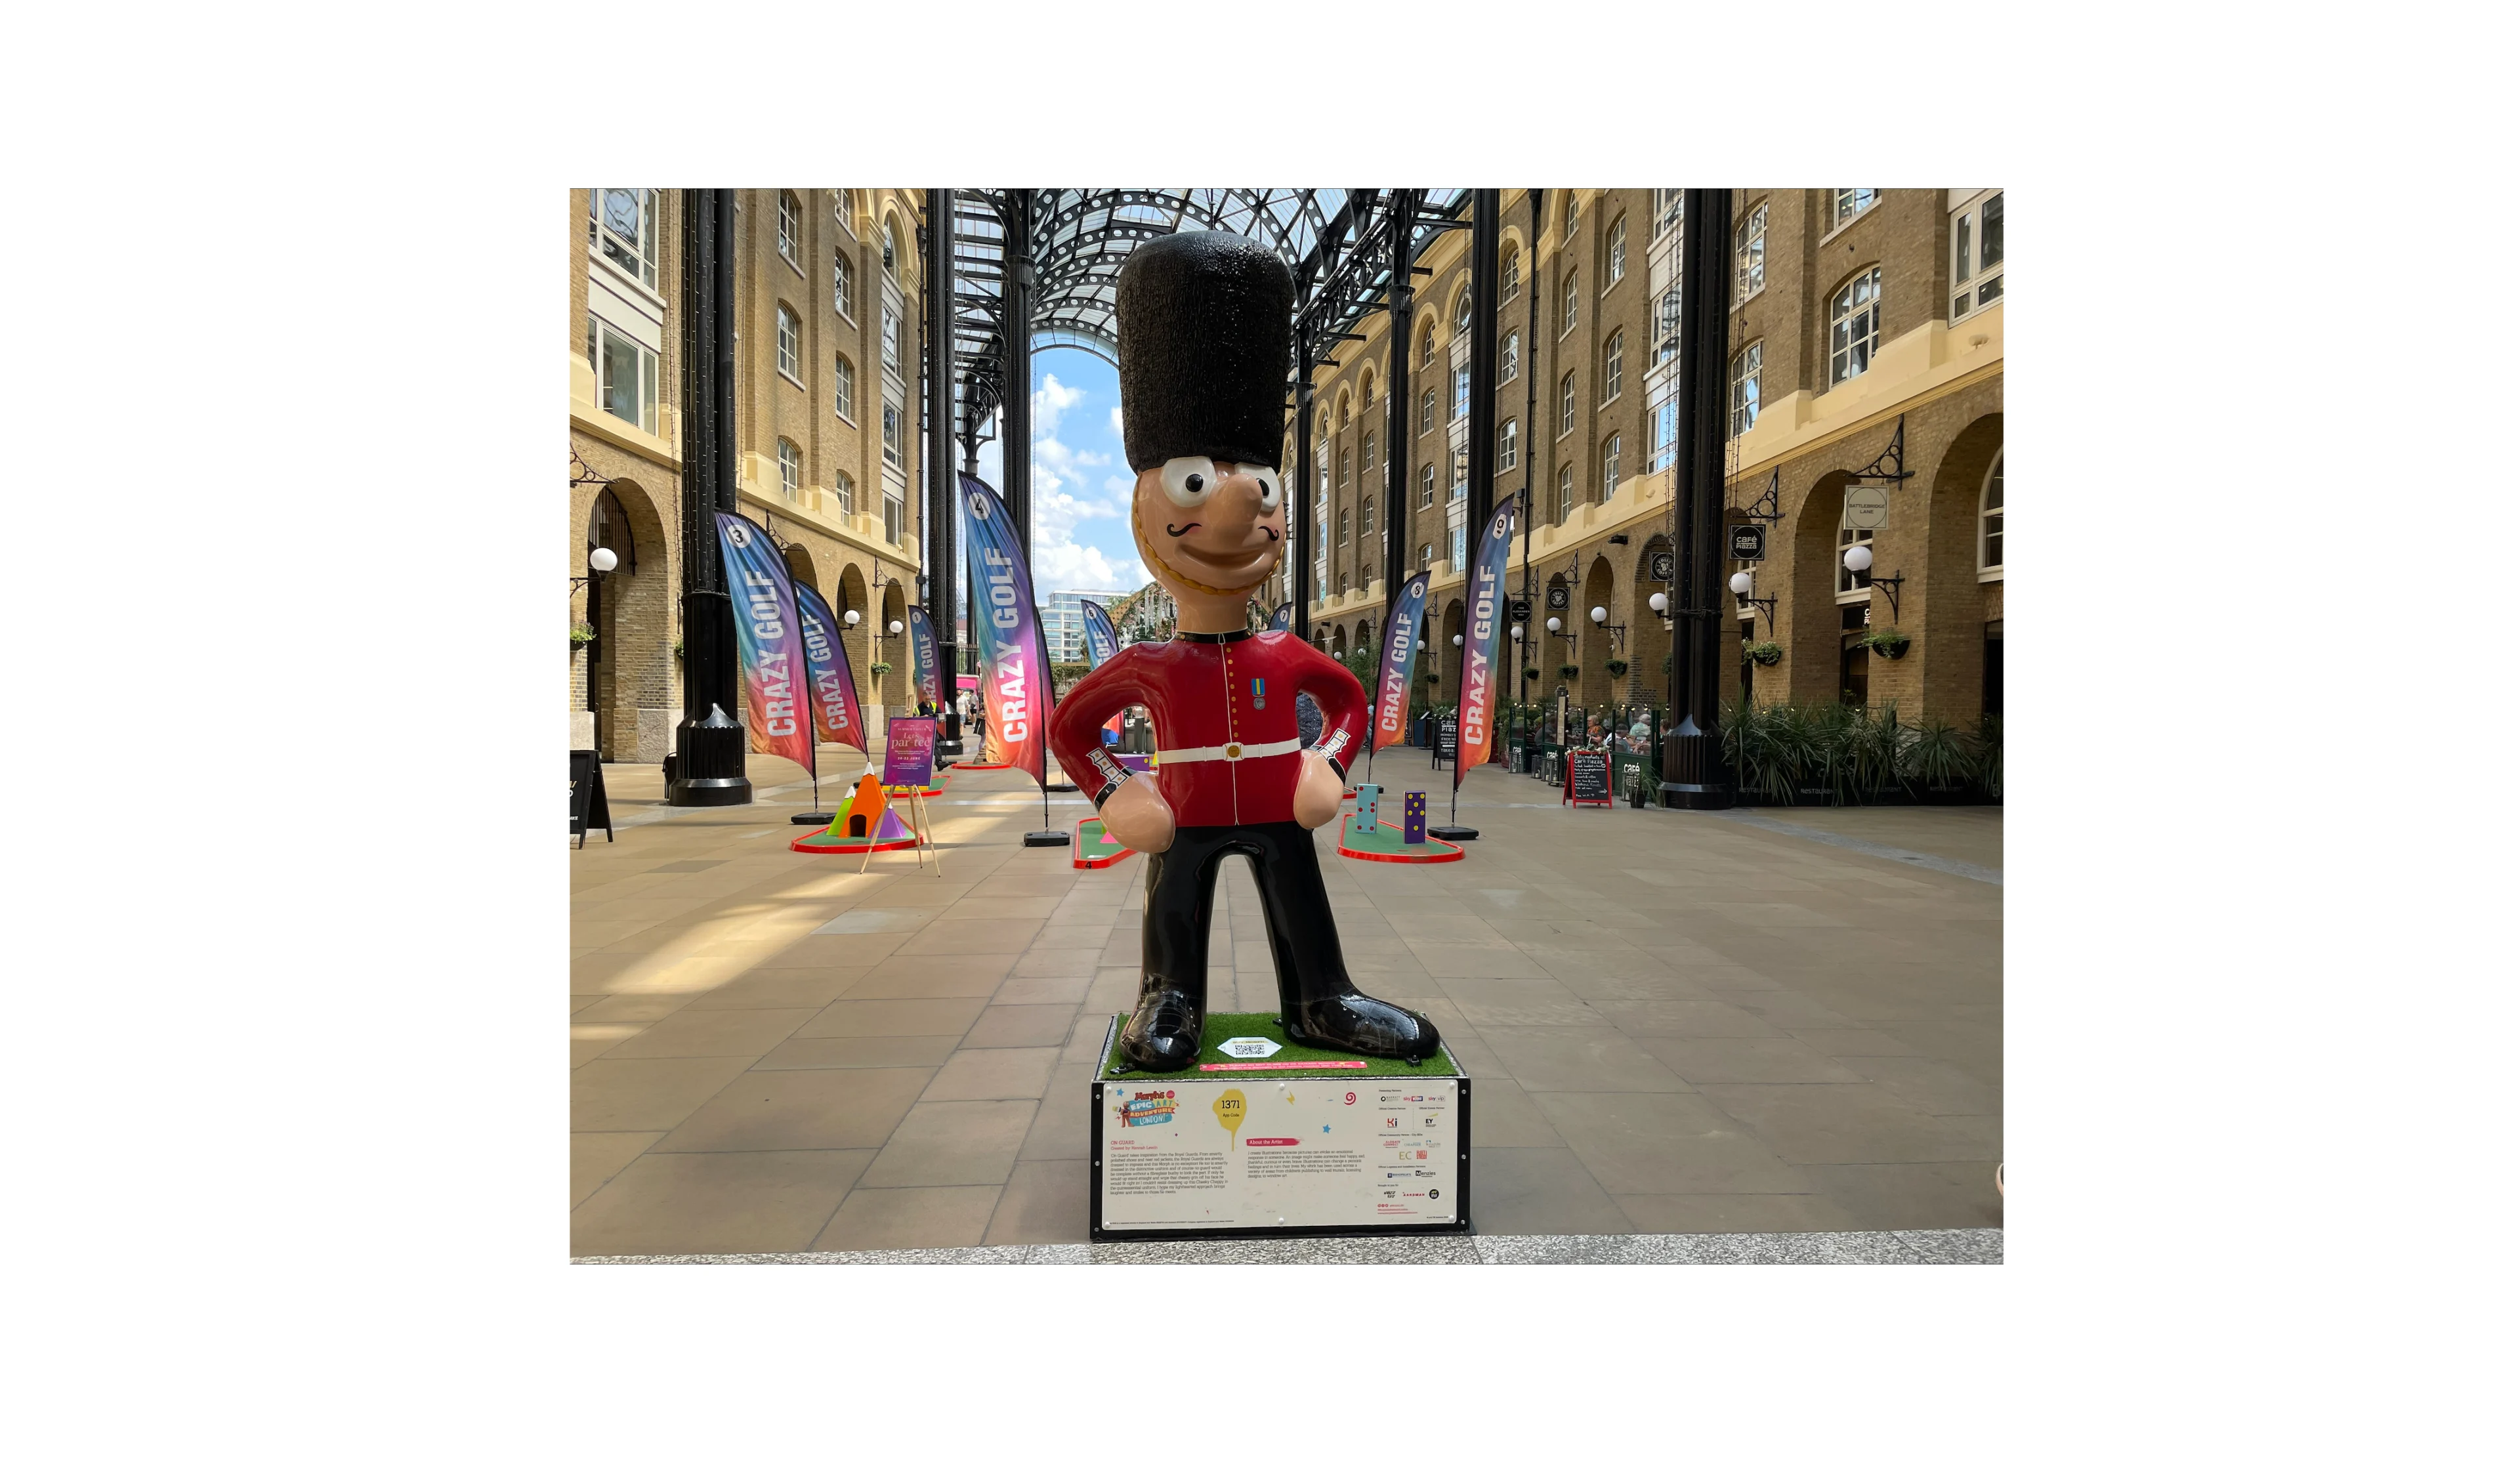 A 6 foot high statue of Morph dressed as a Royal Guard, located in Hay's Galleria in London